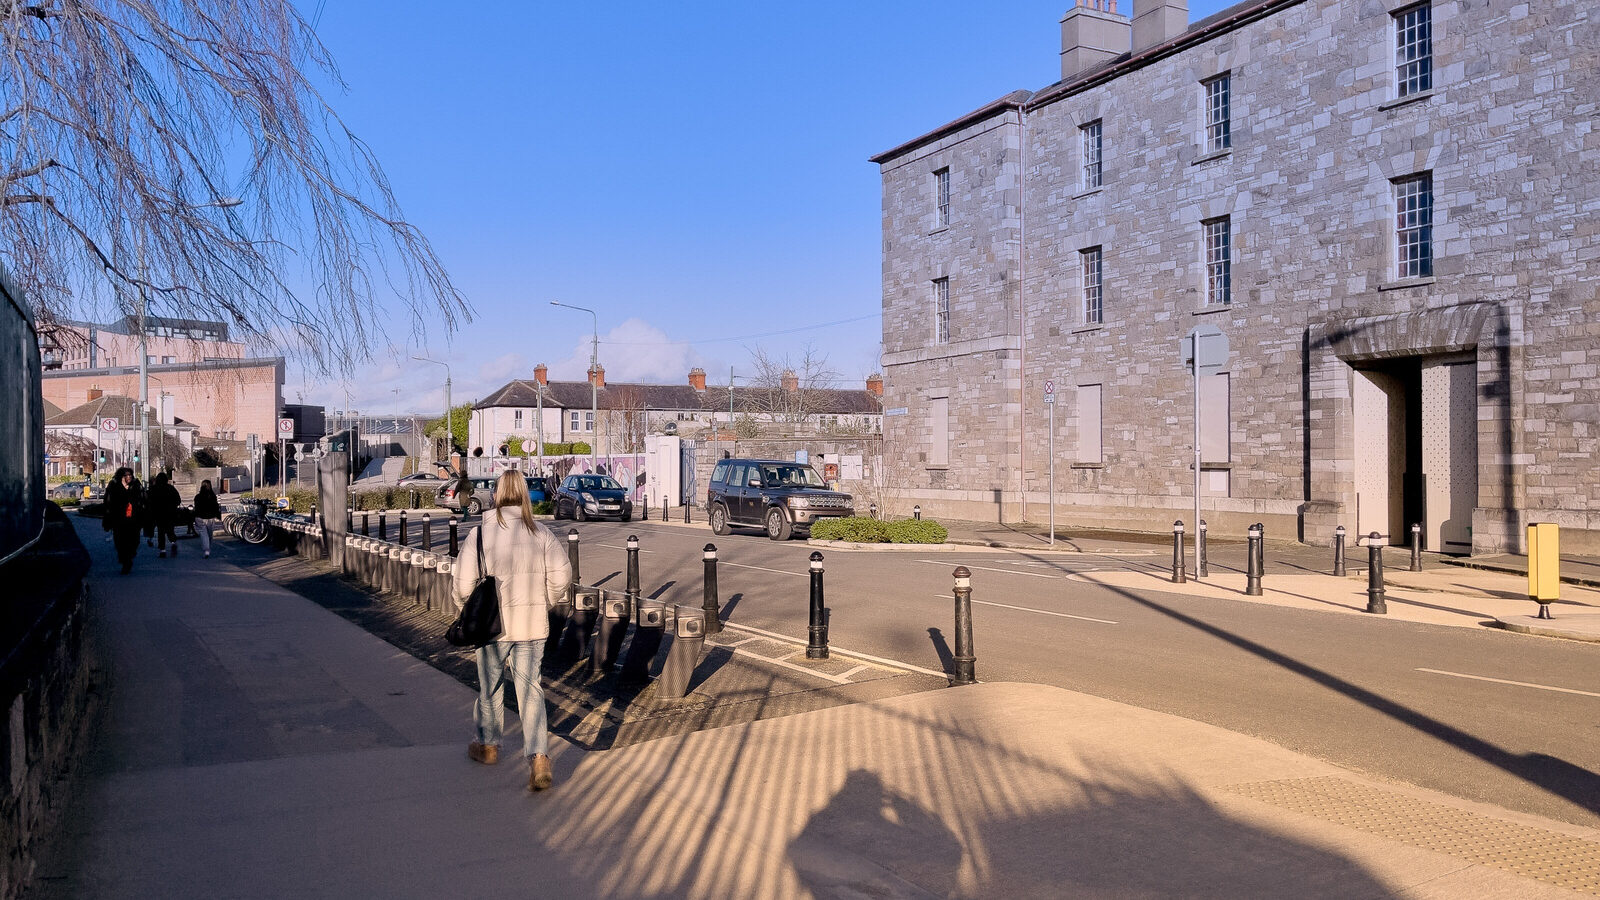 EXPLORING GRANGEGORMAN LOWER [WHICH IS BOTH A STREET AND AN AREA OR DISTRICT]-229041-1